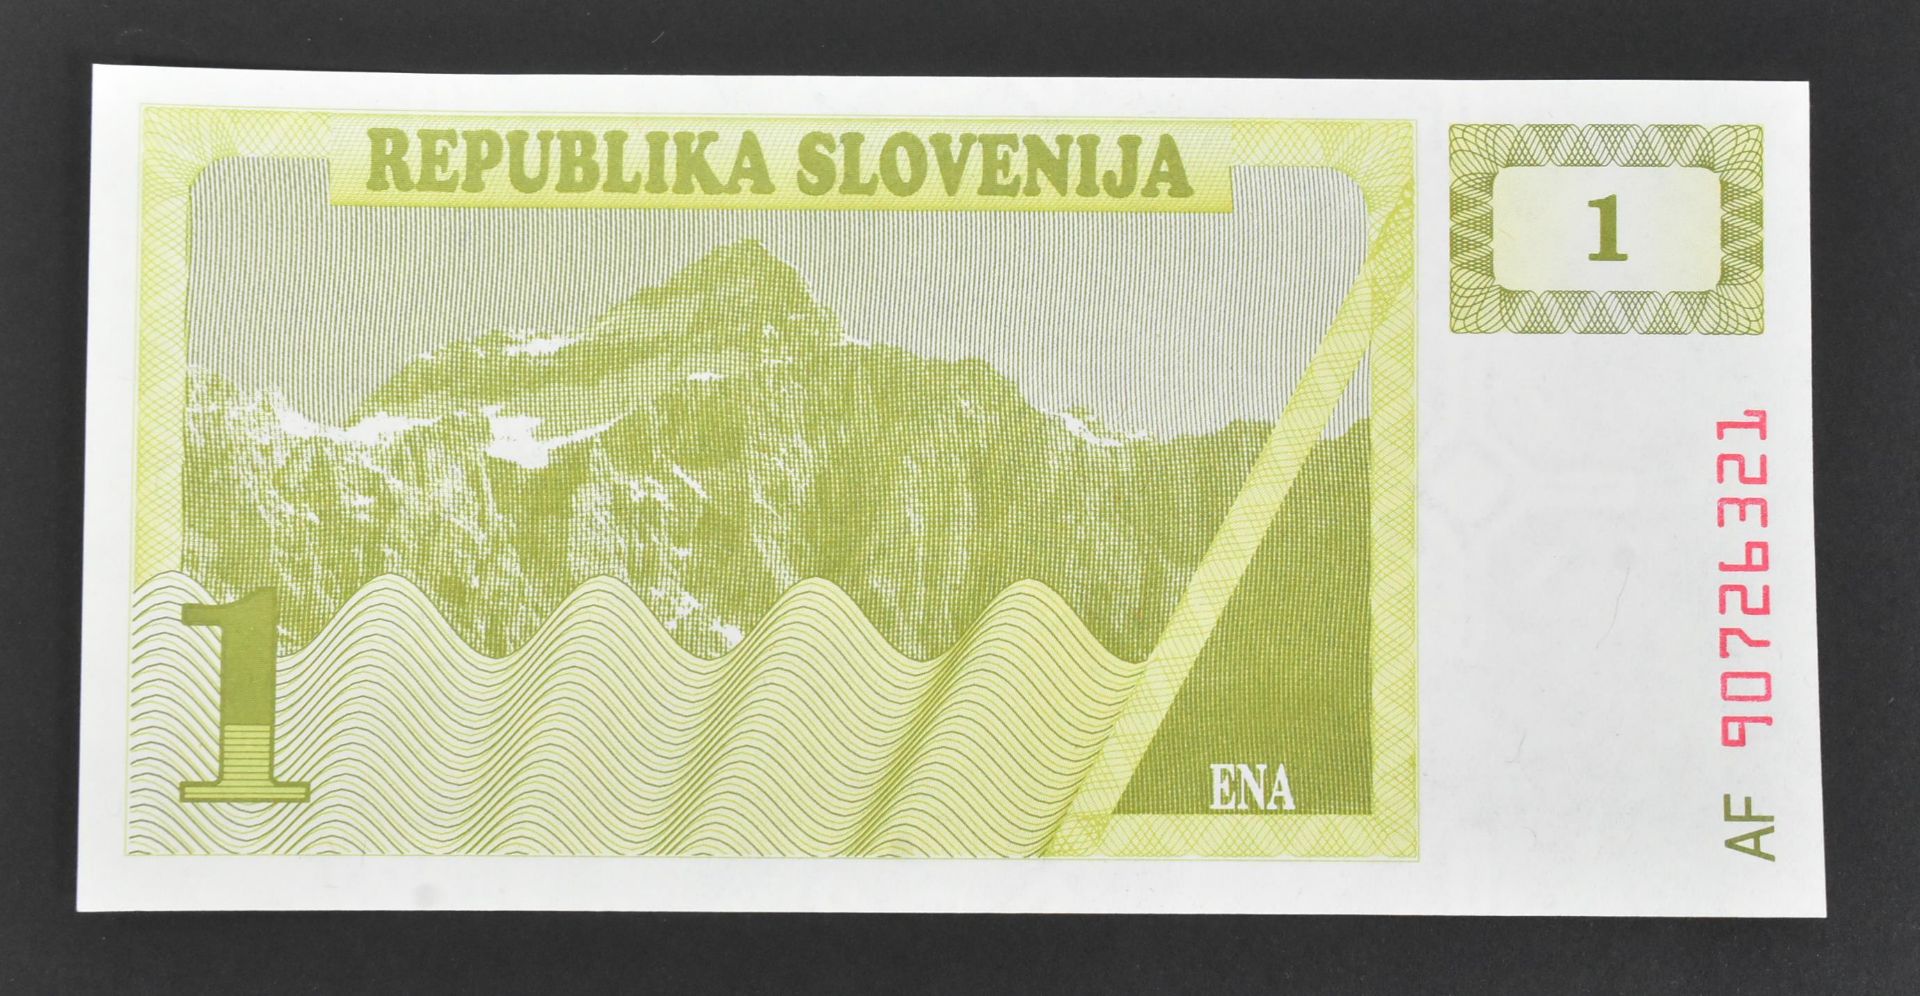 COLLECTION OF UNCIRCULATED BANK NOTES - EUROPEAN - Image 30 of 44